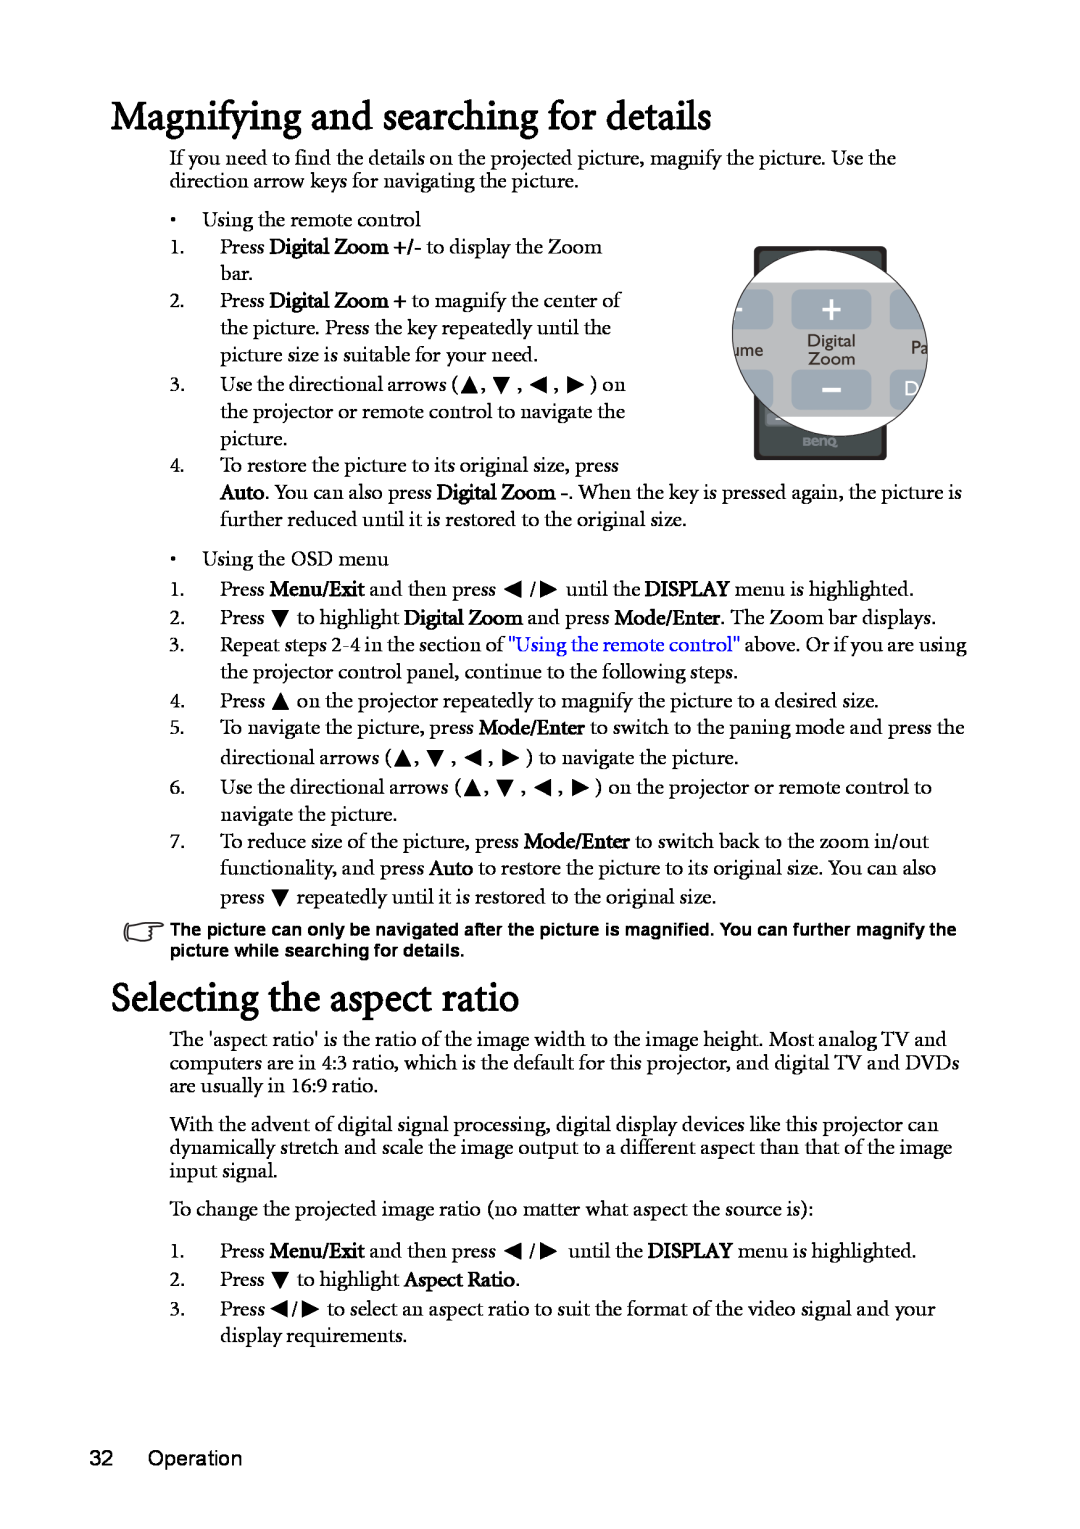 BenQ MX511 user manual Magnifying and searching for details, Selecting the aspect ratio, Operation 